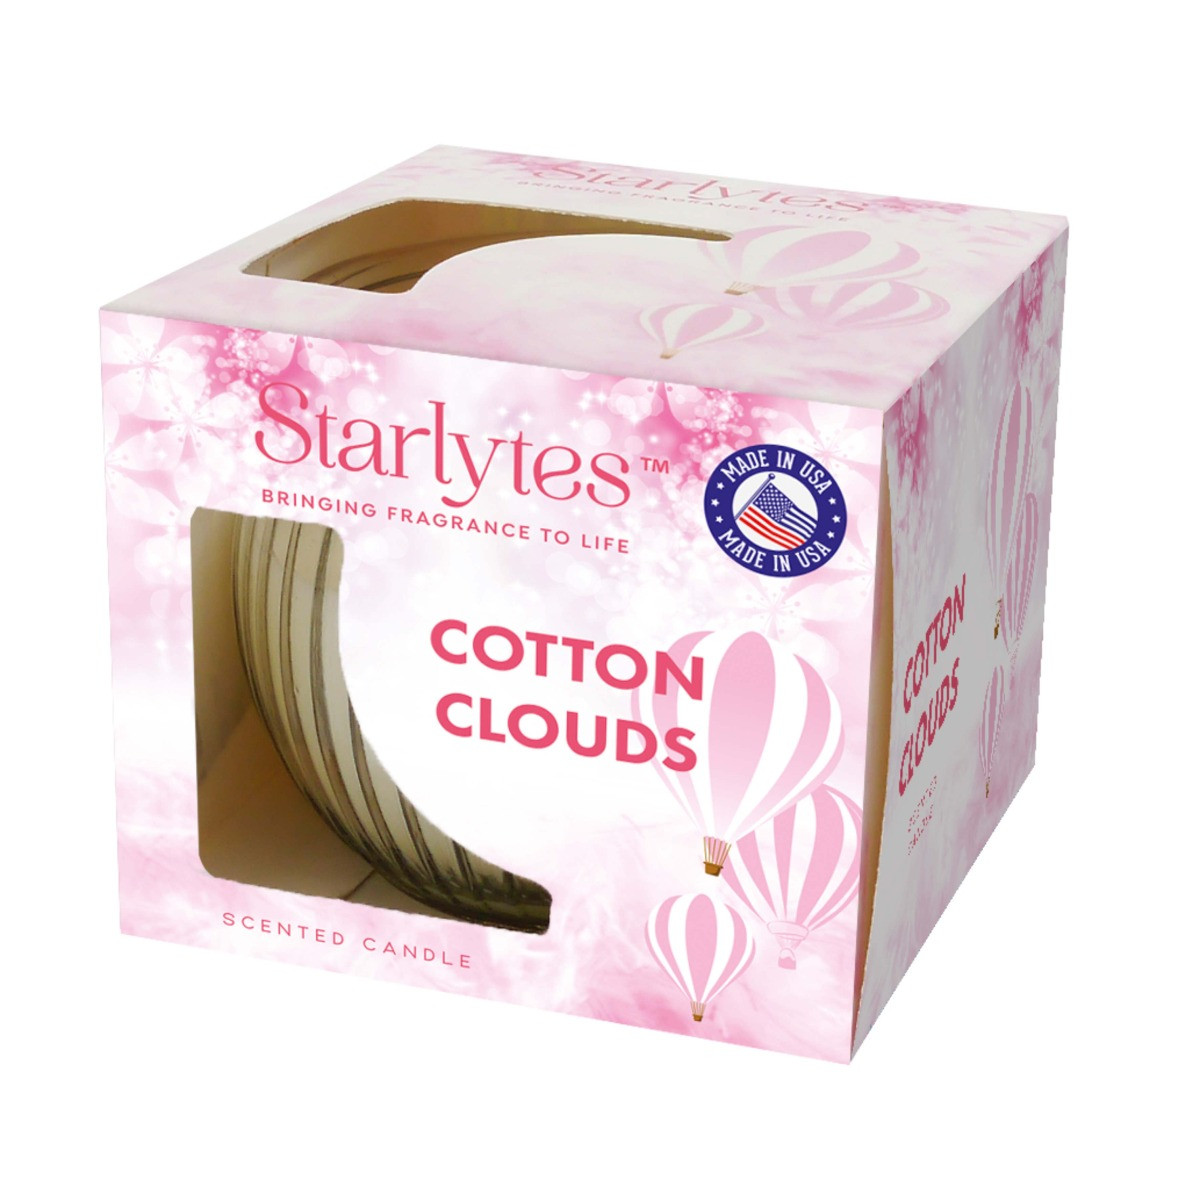 Starlytes Boxed Candle - Cotton Clouds>